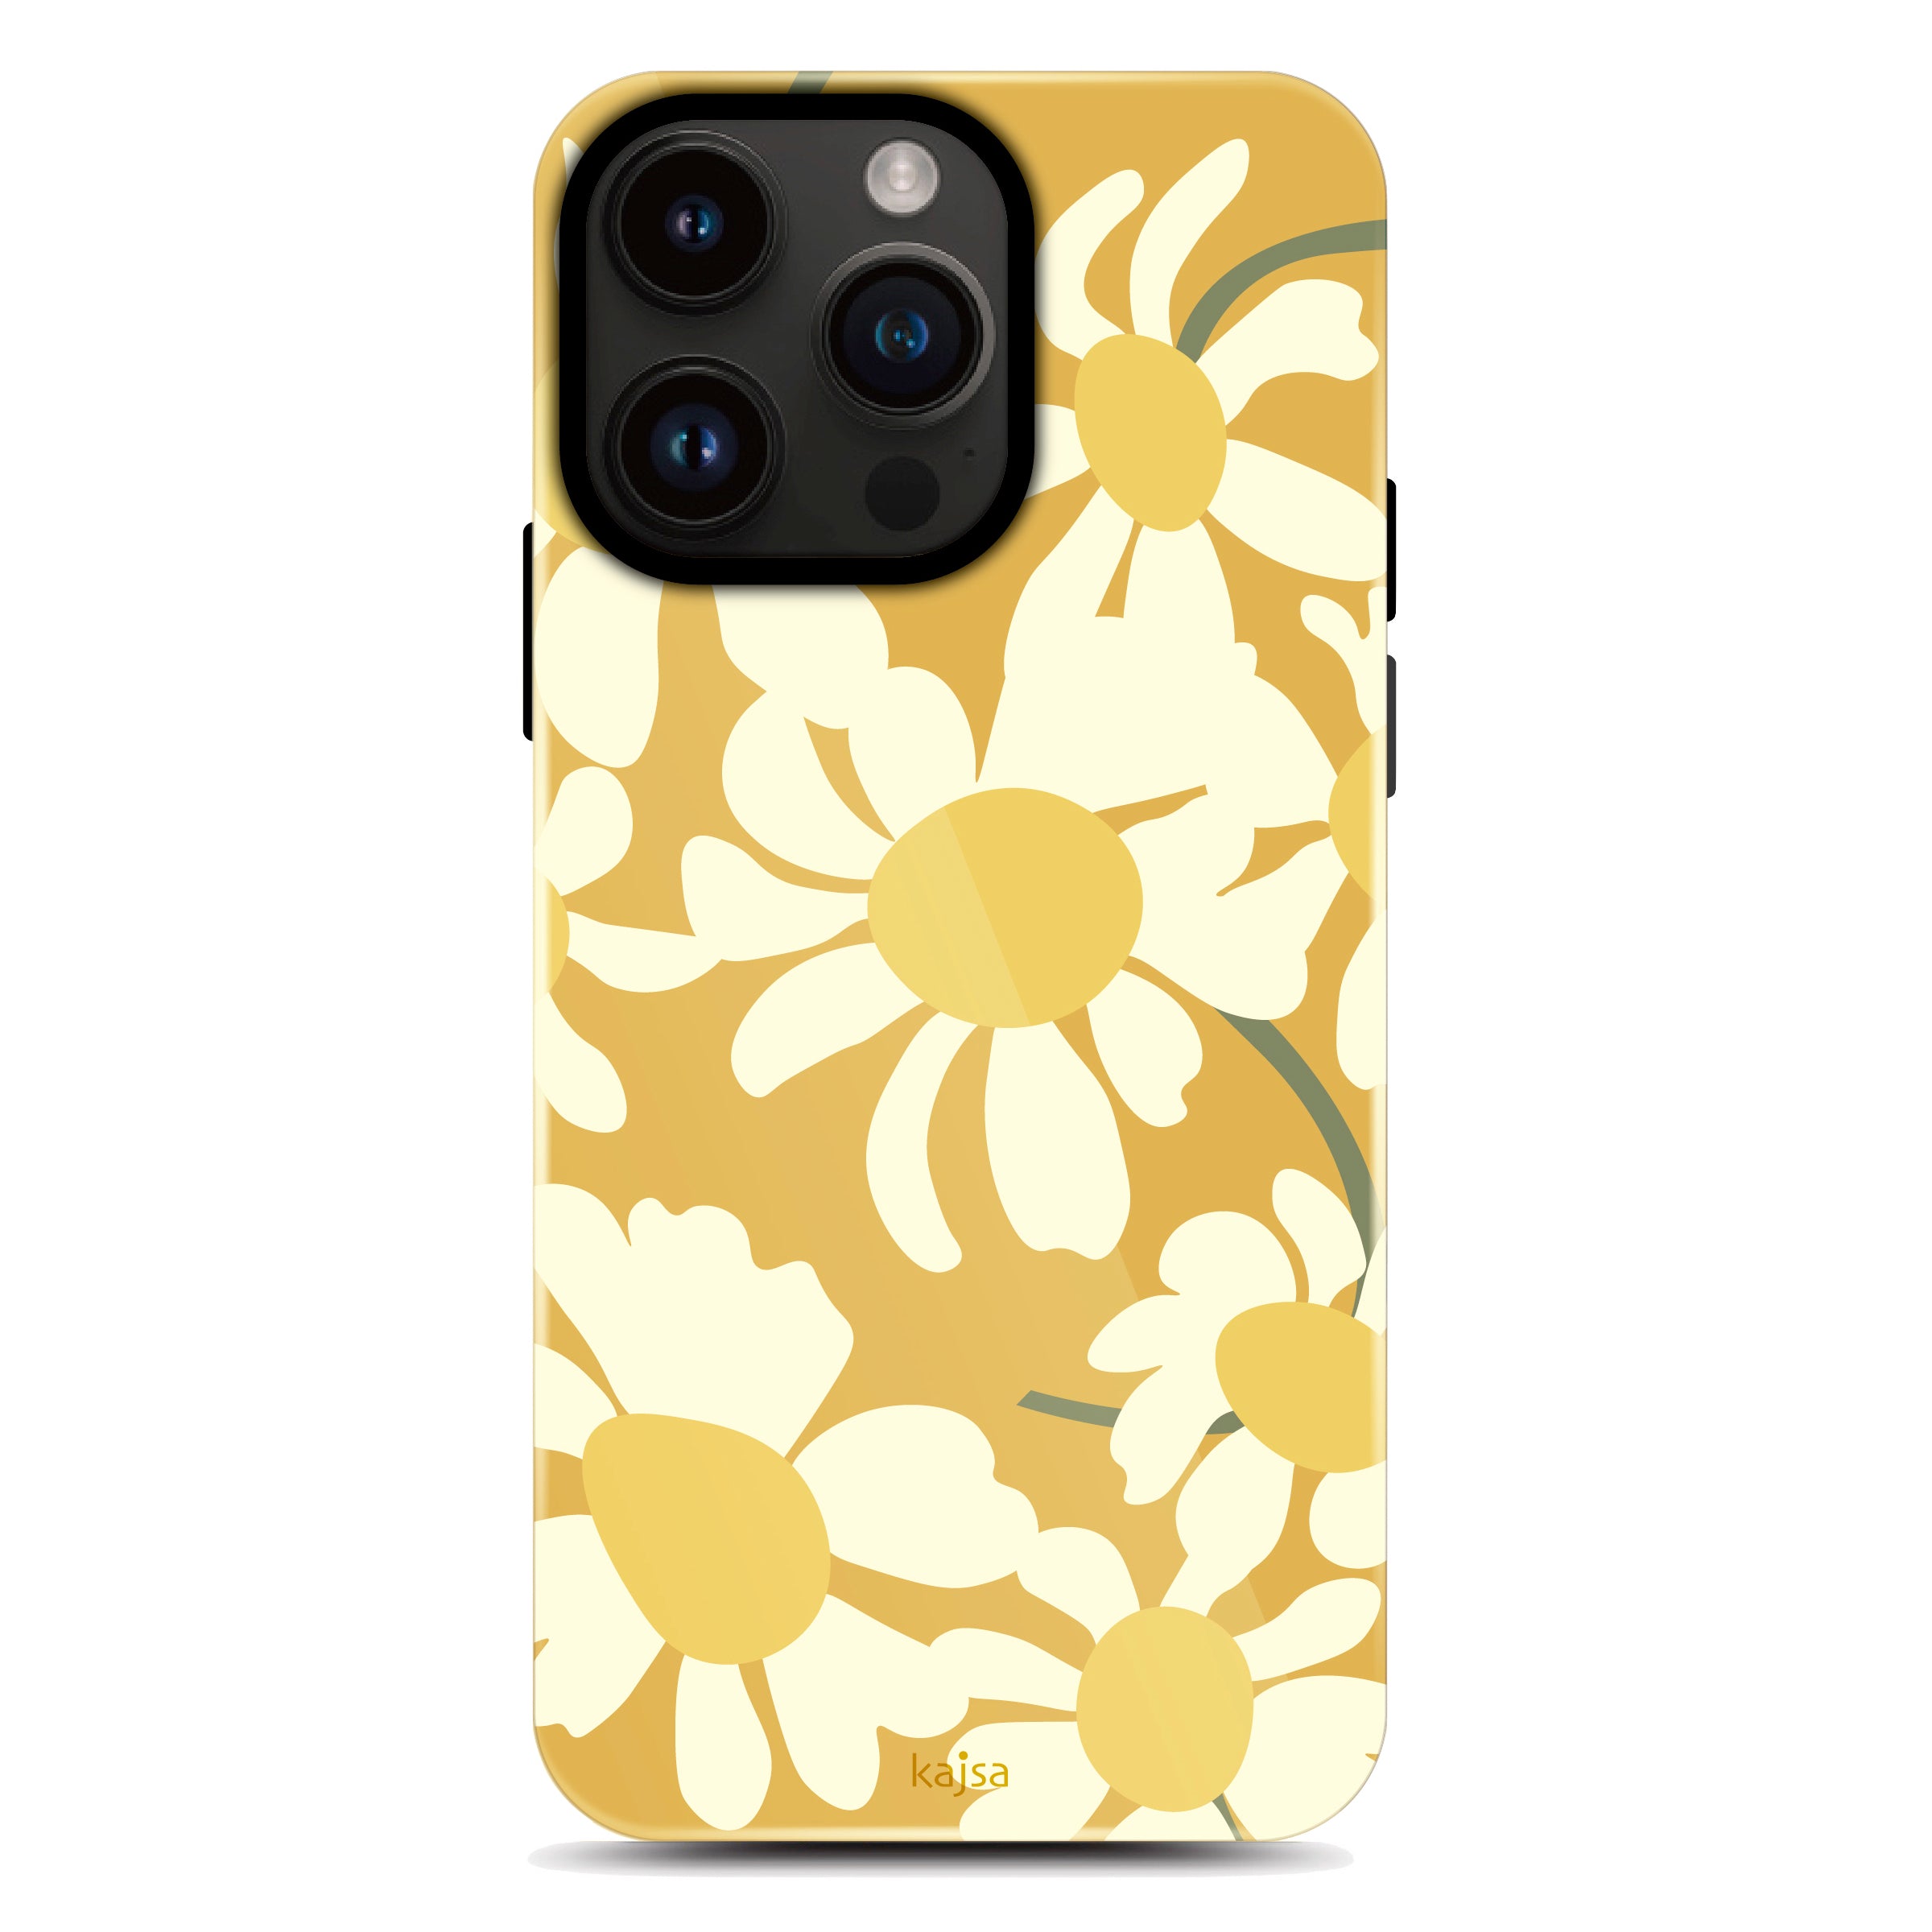 Floral Collection - Tropical Back Base for iPhone 14 (TY2)-Phone Case- phone case - phone cases- phone cover- iphone cover- iphone case- iphone cases- leather case- leather cases- DIYCASE - custom case - leather cover - hand strap case - croco pattern case - snake pattern case - carbon fiber phone case - phone case brand - unique phone case - high quality - phone case brand - protective case - buy phone case hong kong - online buy phone case - iphone‎手機殼 - 客製化手機殼 - samsung ‎手機殼 - 香港手機殼 - 買電話殼